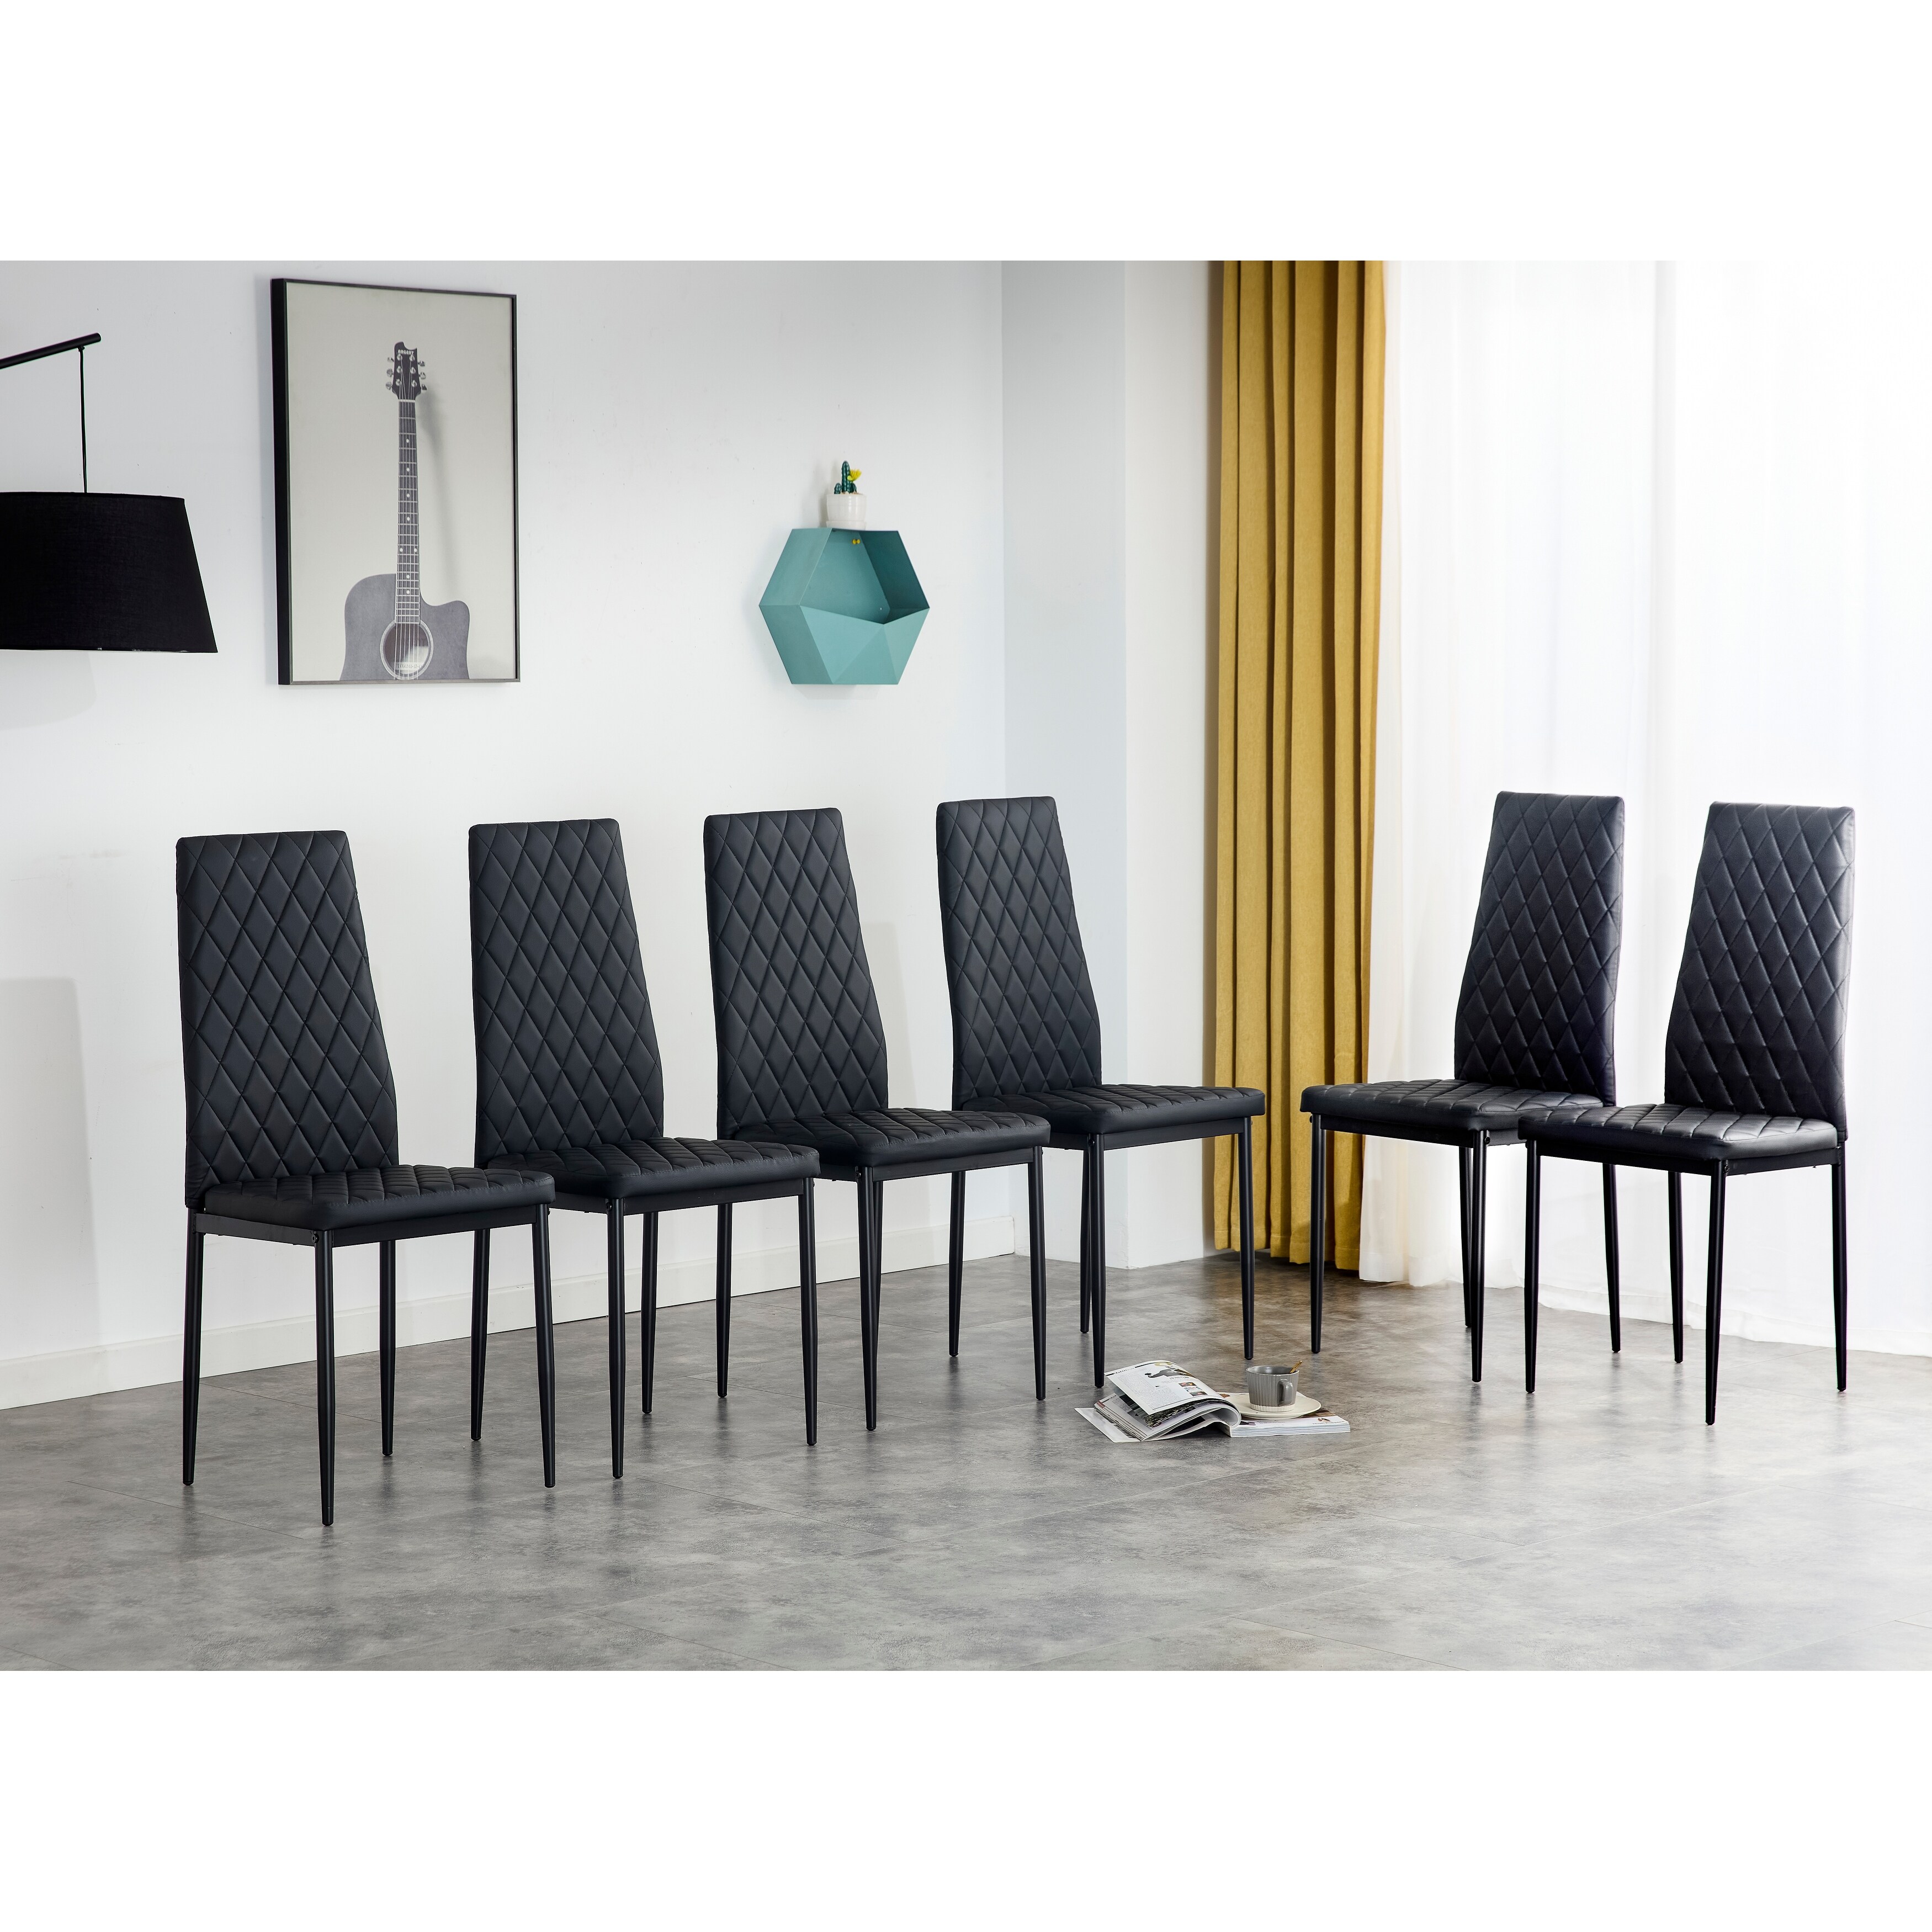 Modern Style Dining Chairs (Set of 6), PU Soft Leather Dining Chairs, For Living Room Family Meals and Small Gatherings